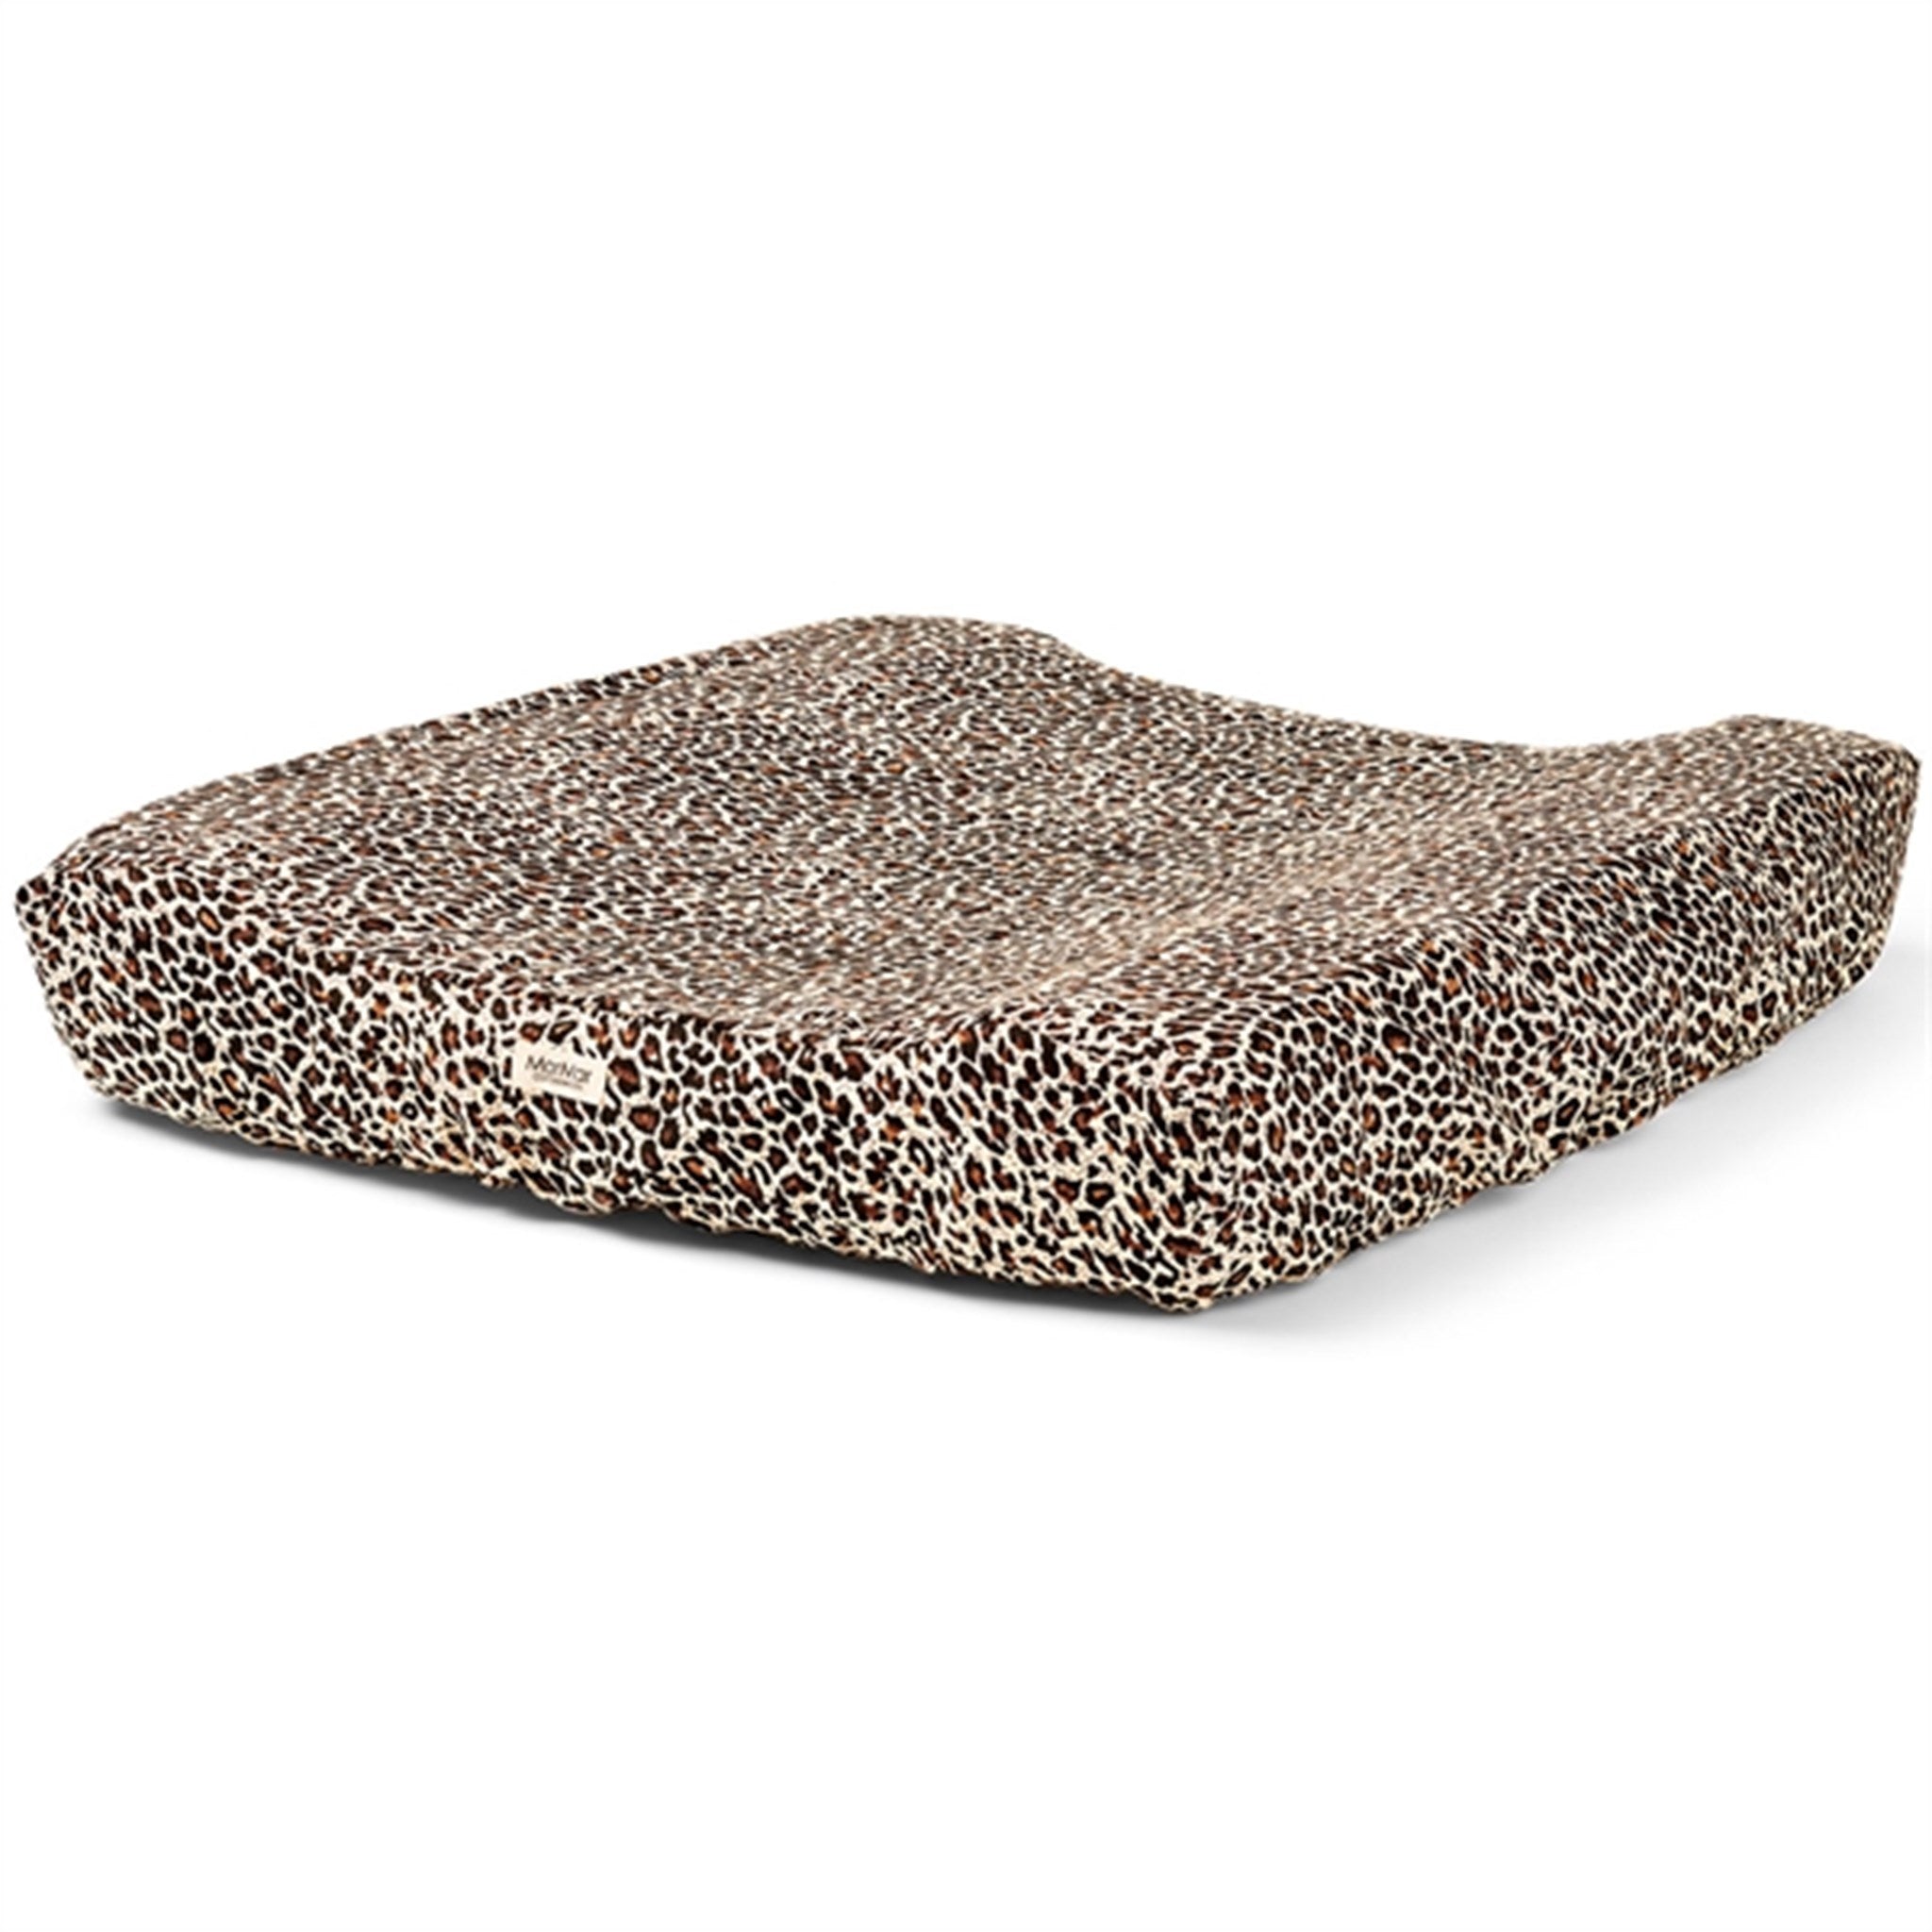 MarMar Changing Cushion Cover Brown Leo